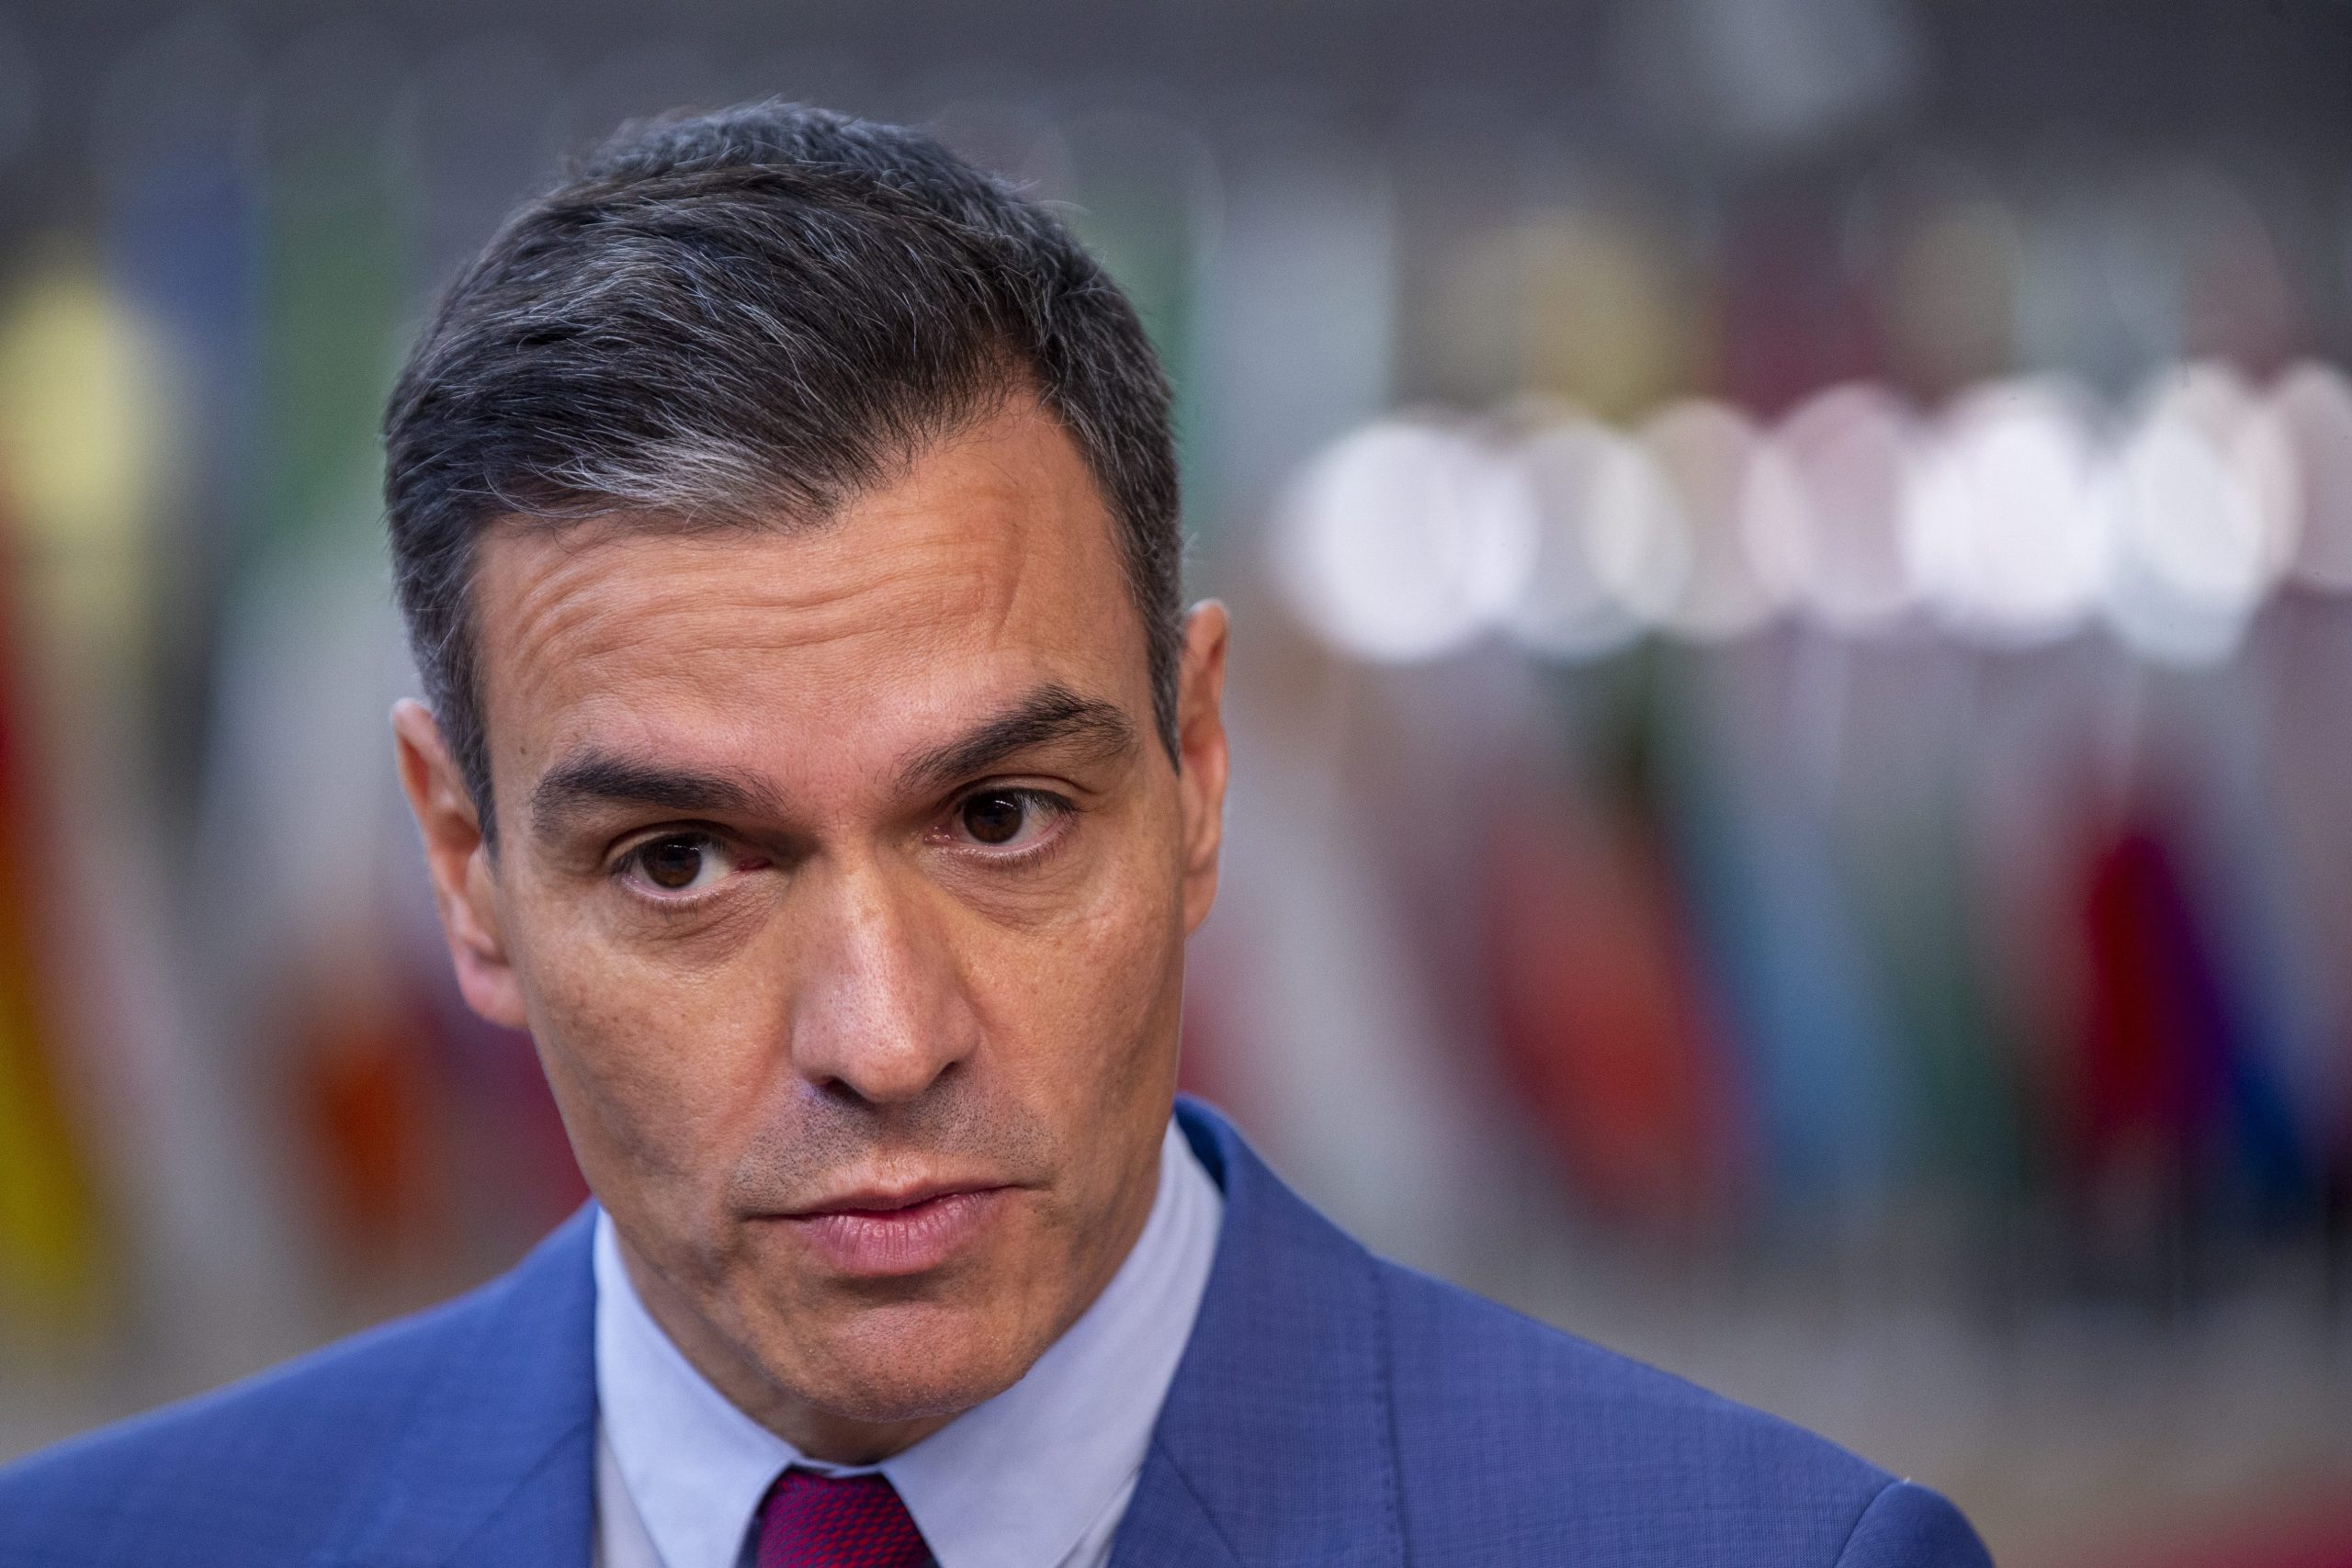 Pedro Sanchez says Spain will give 2 million COVID-19 vaccines for refugees around the world